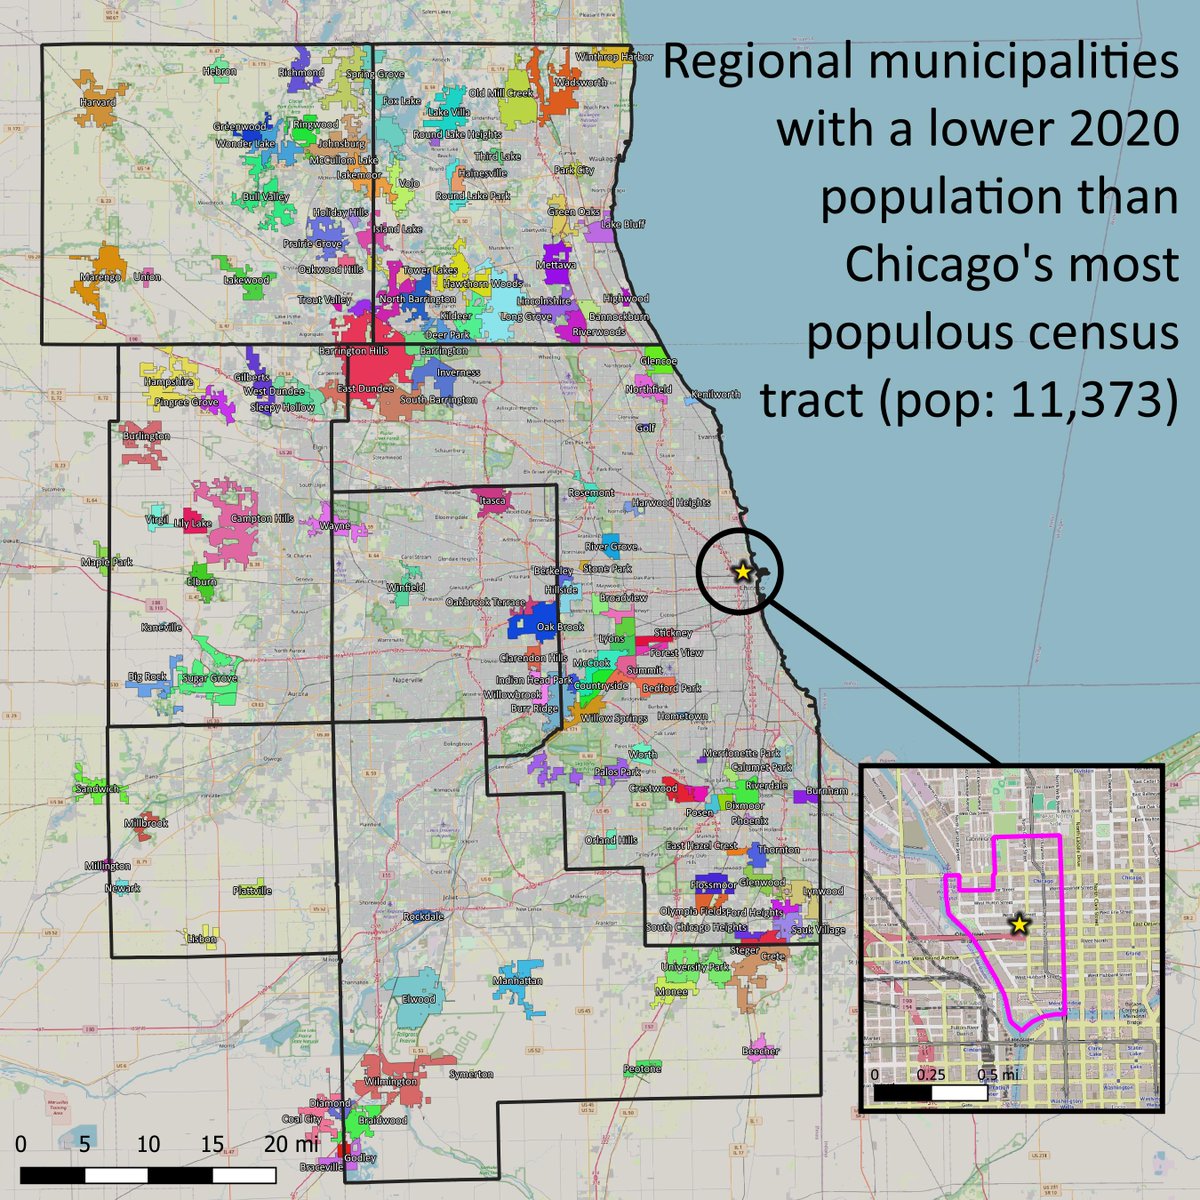 In 2020, there were 141 municipalities in the seven-county Chicago region with a lower population than the city's most populous census tract, which was located in River North.